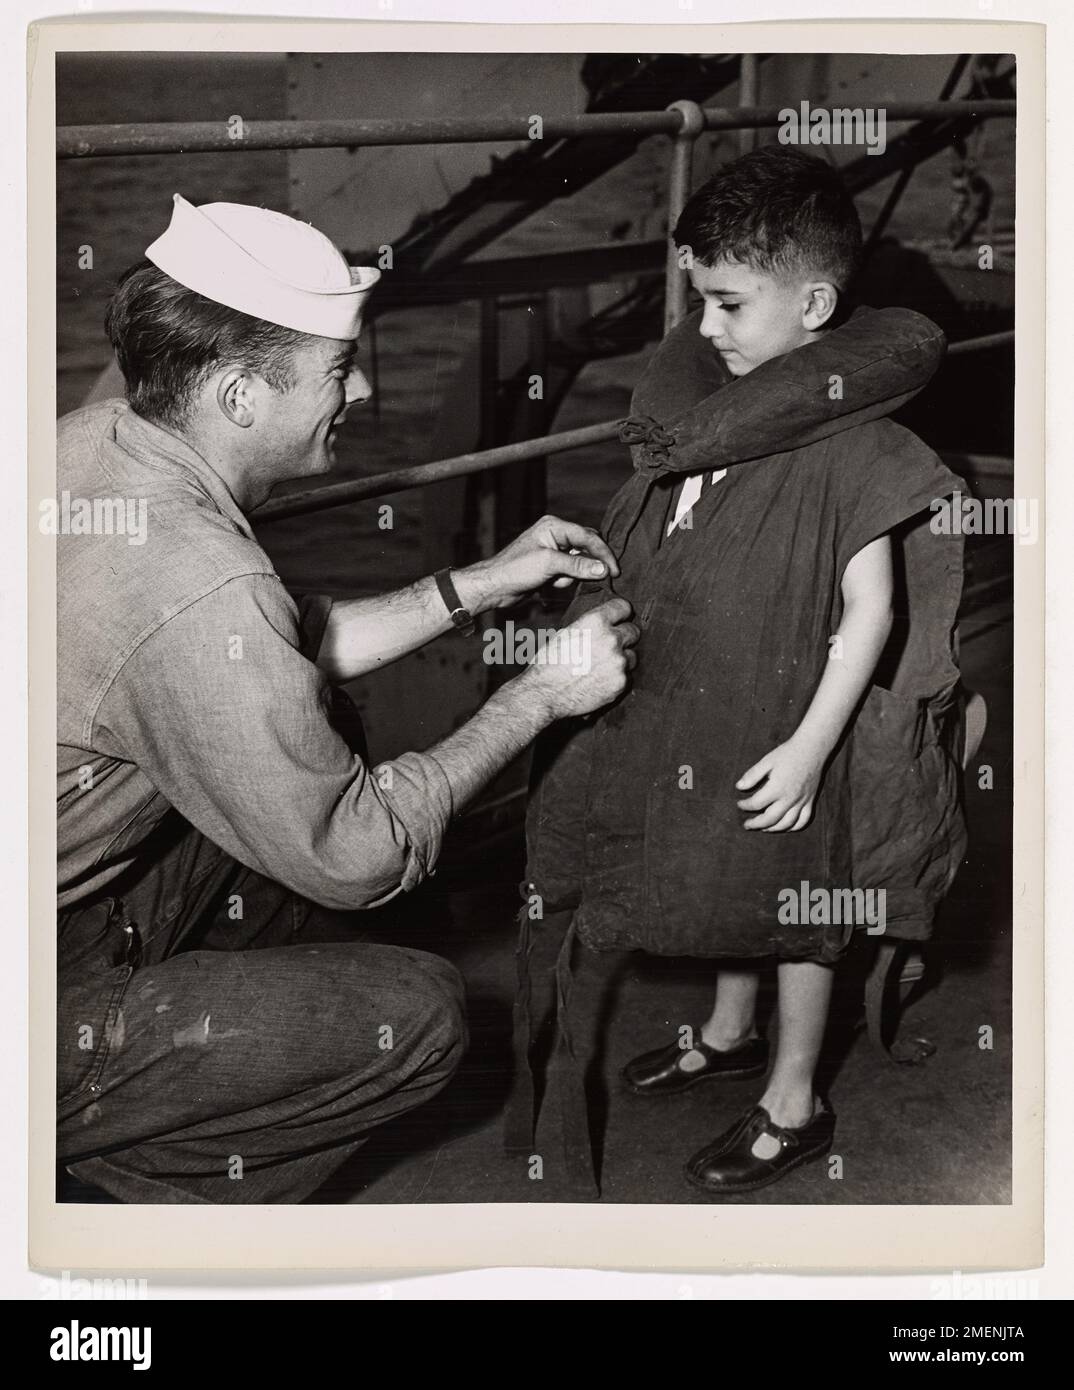 Cheer Up, Chum. Everything 'll Be Okay. A saddened little refugee boy -- his laughter lost with his home in the war-ravaged Pacific -- seems dubious about donning the life jacket aboard a Coast Guard-manned transport en route from the combat zone. To Coast Guardsman John Brady, boatswain's mate second class, the job of cheering up the youngster is tougher, in a way, than the invasion beaches of Tulagi, Guadalcanal, Rendova, and New Georgia, where Brady ran landing barges under Jap fire. The Coast Guardsman's home is in Long Island, N.Y. Stock Photo